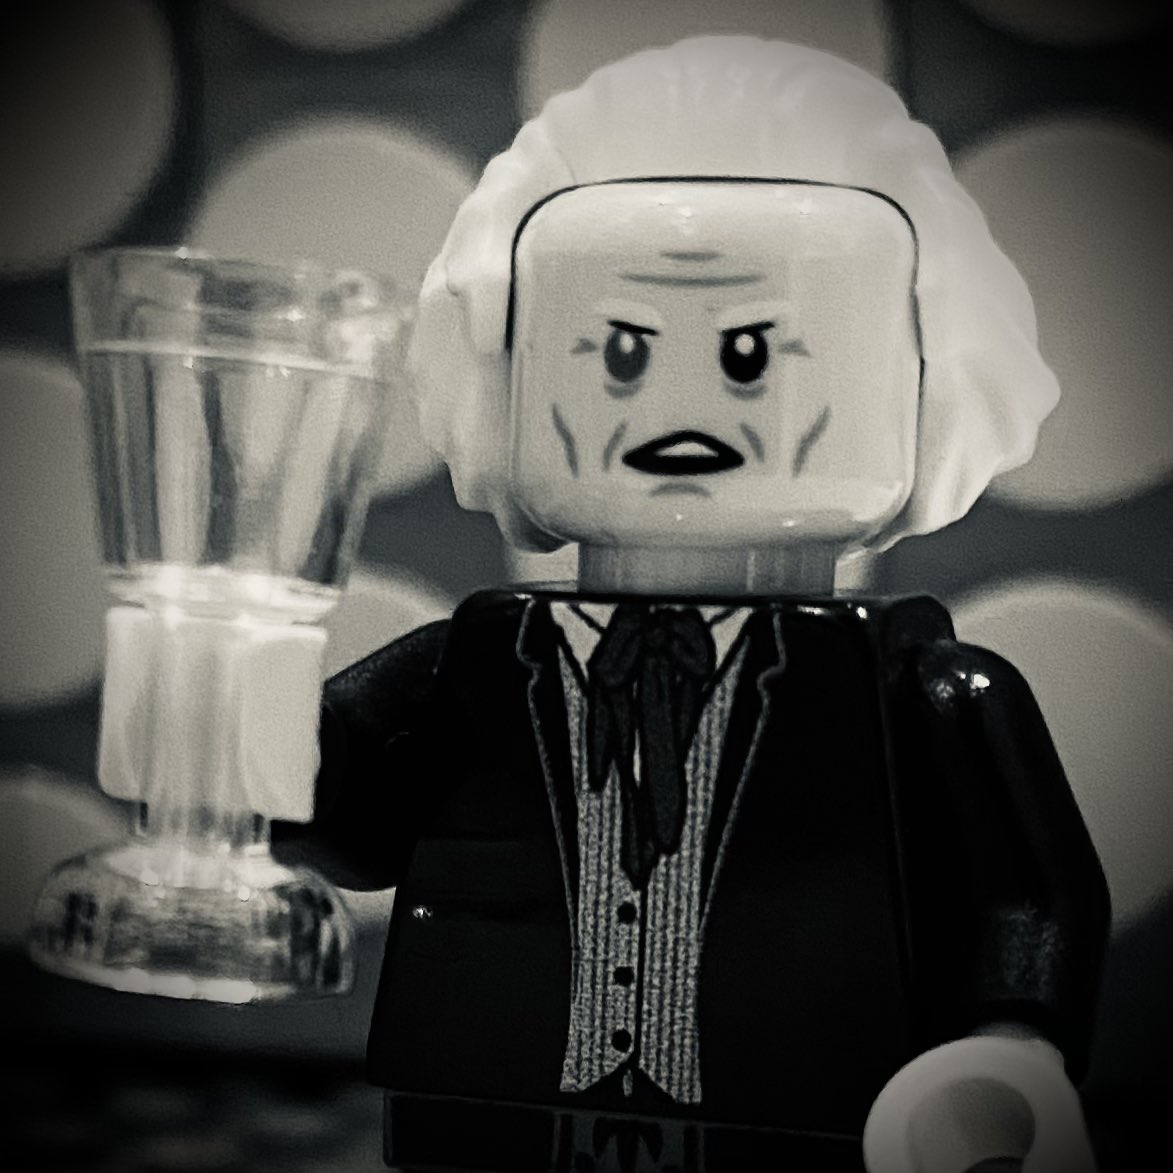 And as is tradition…

Incidentally, a Happy Christmas to all of you at home!

#LEGO #legodoctorwho #1stDoctor #DoctorWho